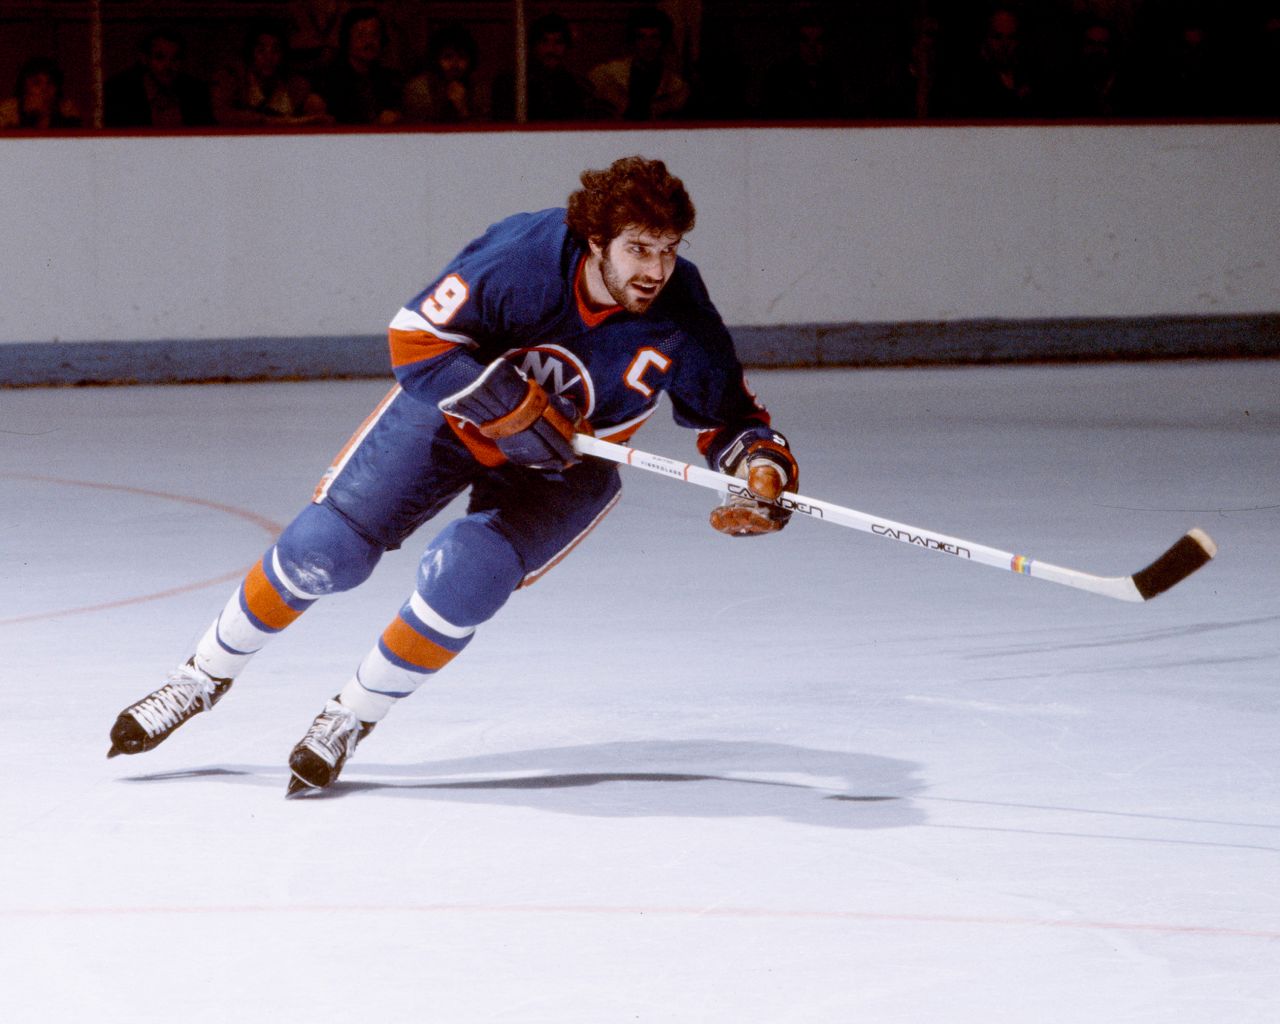 <a href="https://www.cnn.com/2022/01/22/sport/clark-gillies-death/index.html" target="_blank">Clark Gillies,</a> a Hall of Fame hockey player and four-time Stanley Cup winner with the New York Islanders, died on January 21, according to the National Hockey League. He was 67.